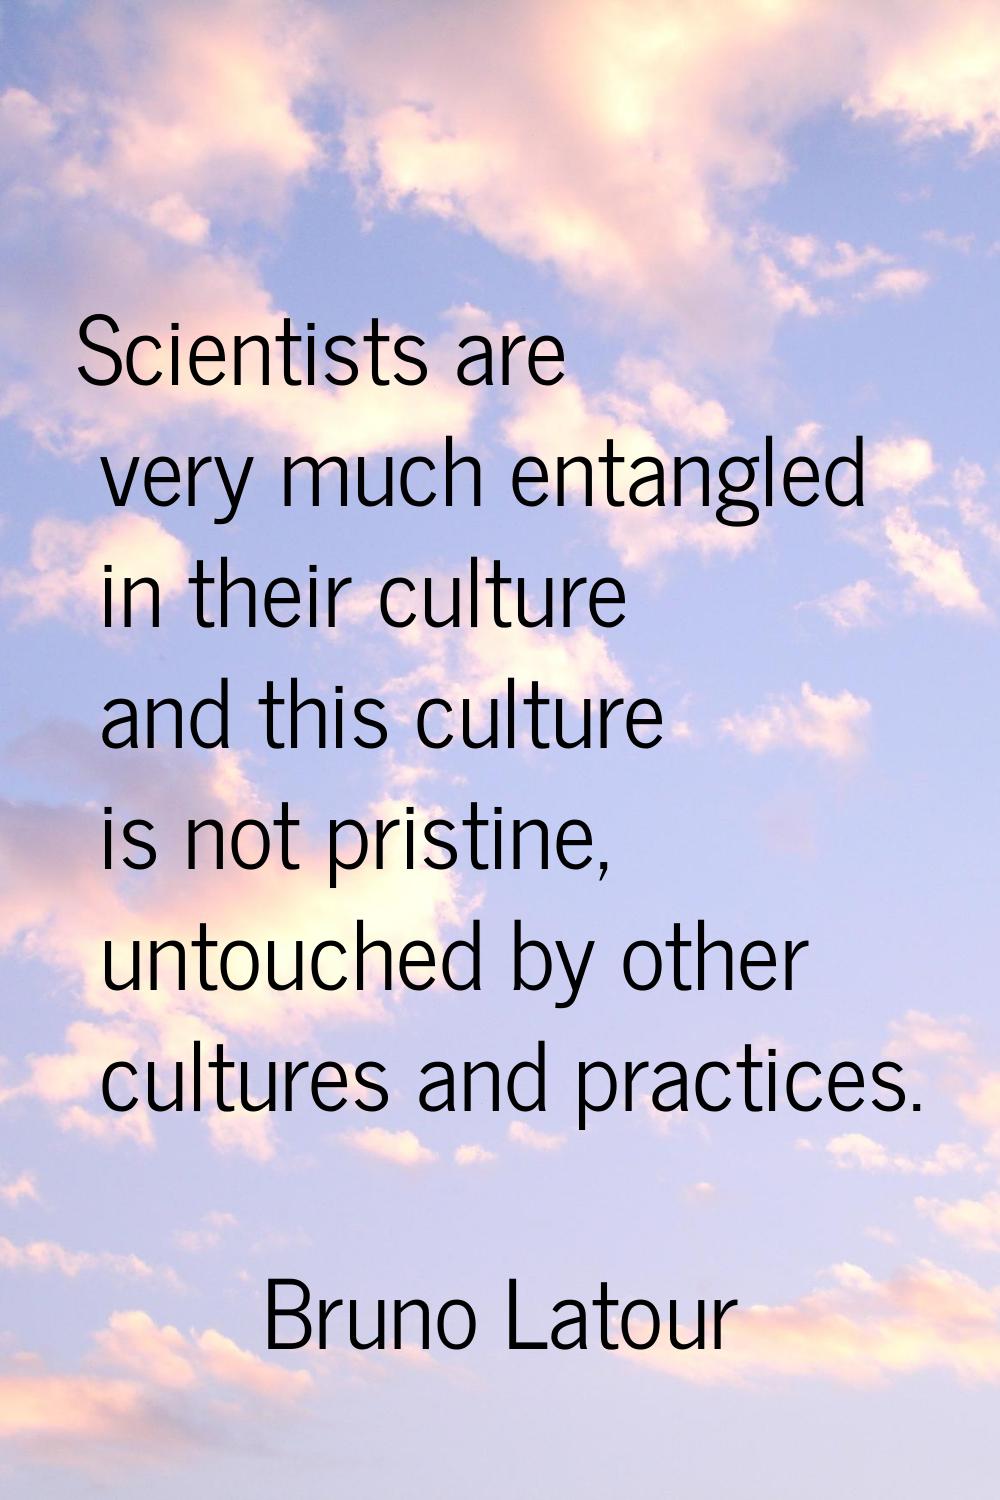 Scientists are very much entangled in their culture and this culture is not pristine, untouched by 